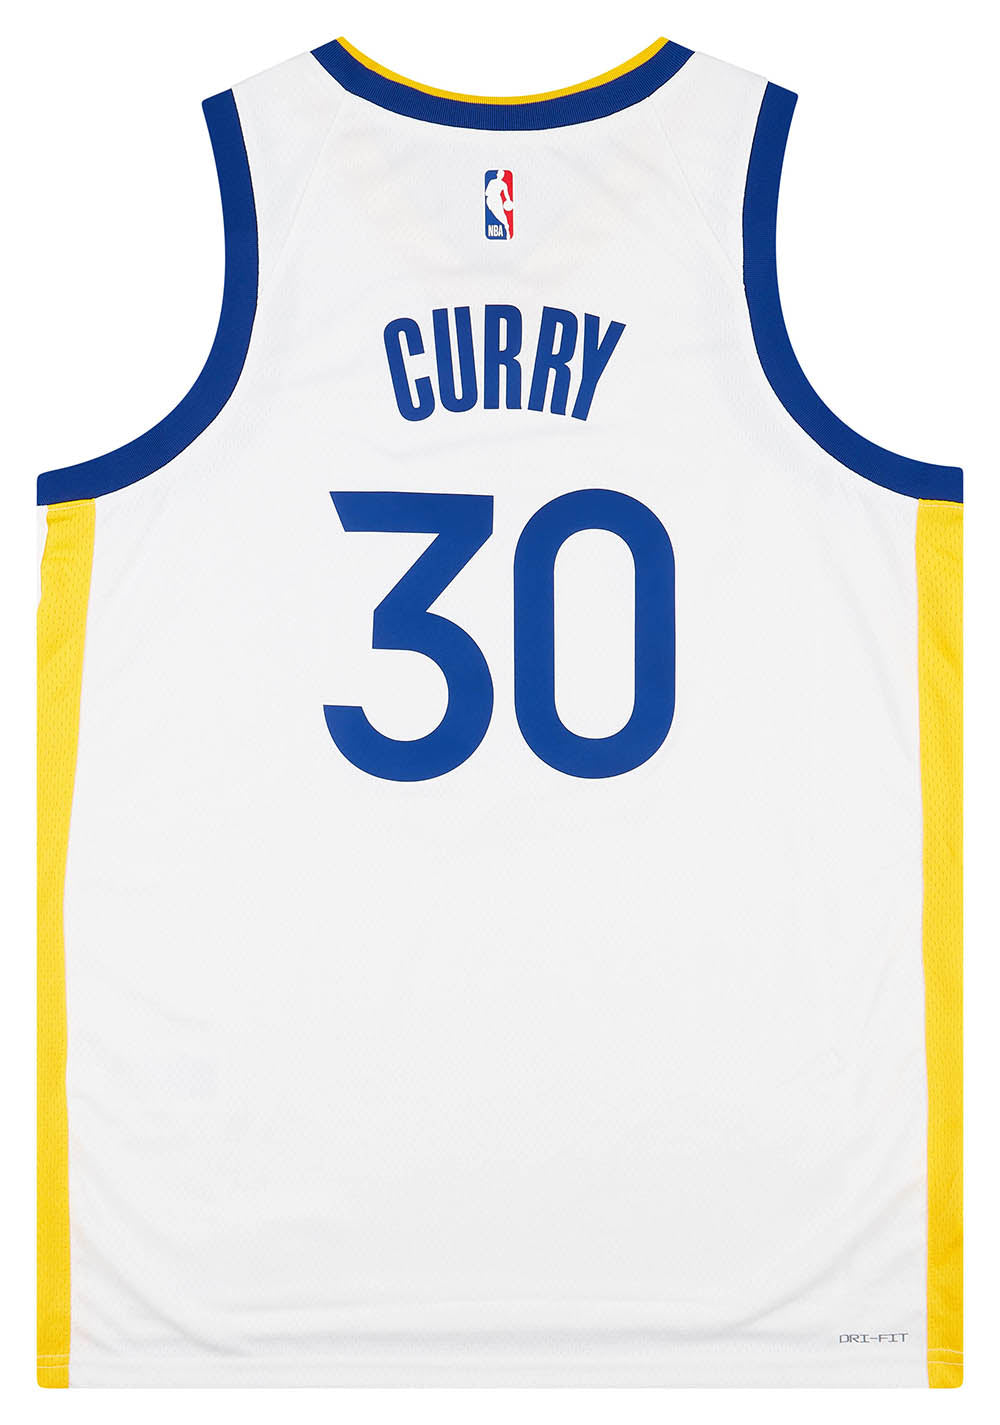 2017-23 GOLDEN STATE WARRIORS CURRY #30 NIKE SWINGMAN JERSEY (HOME) XL - W/TAGS